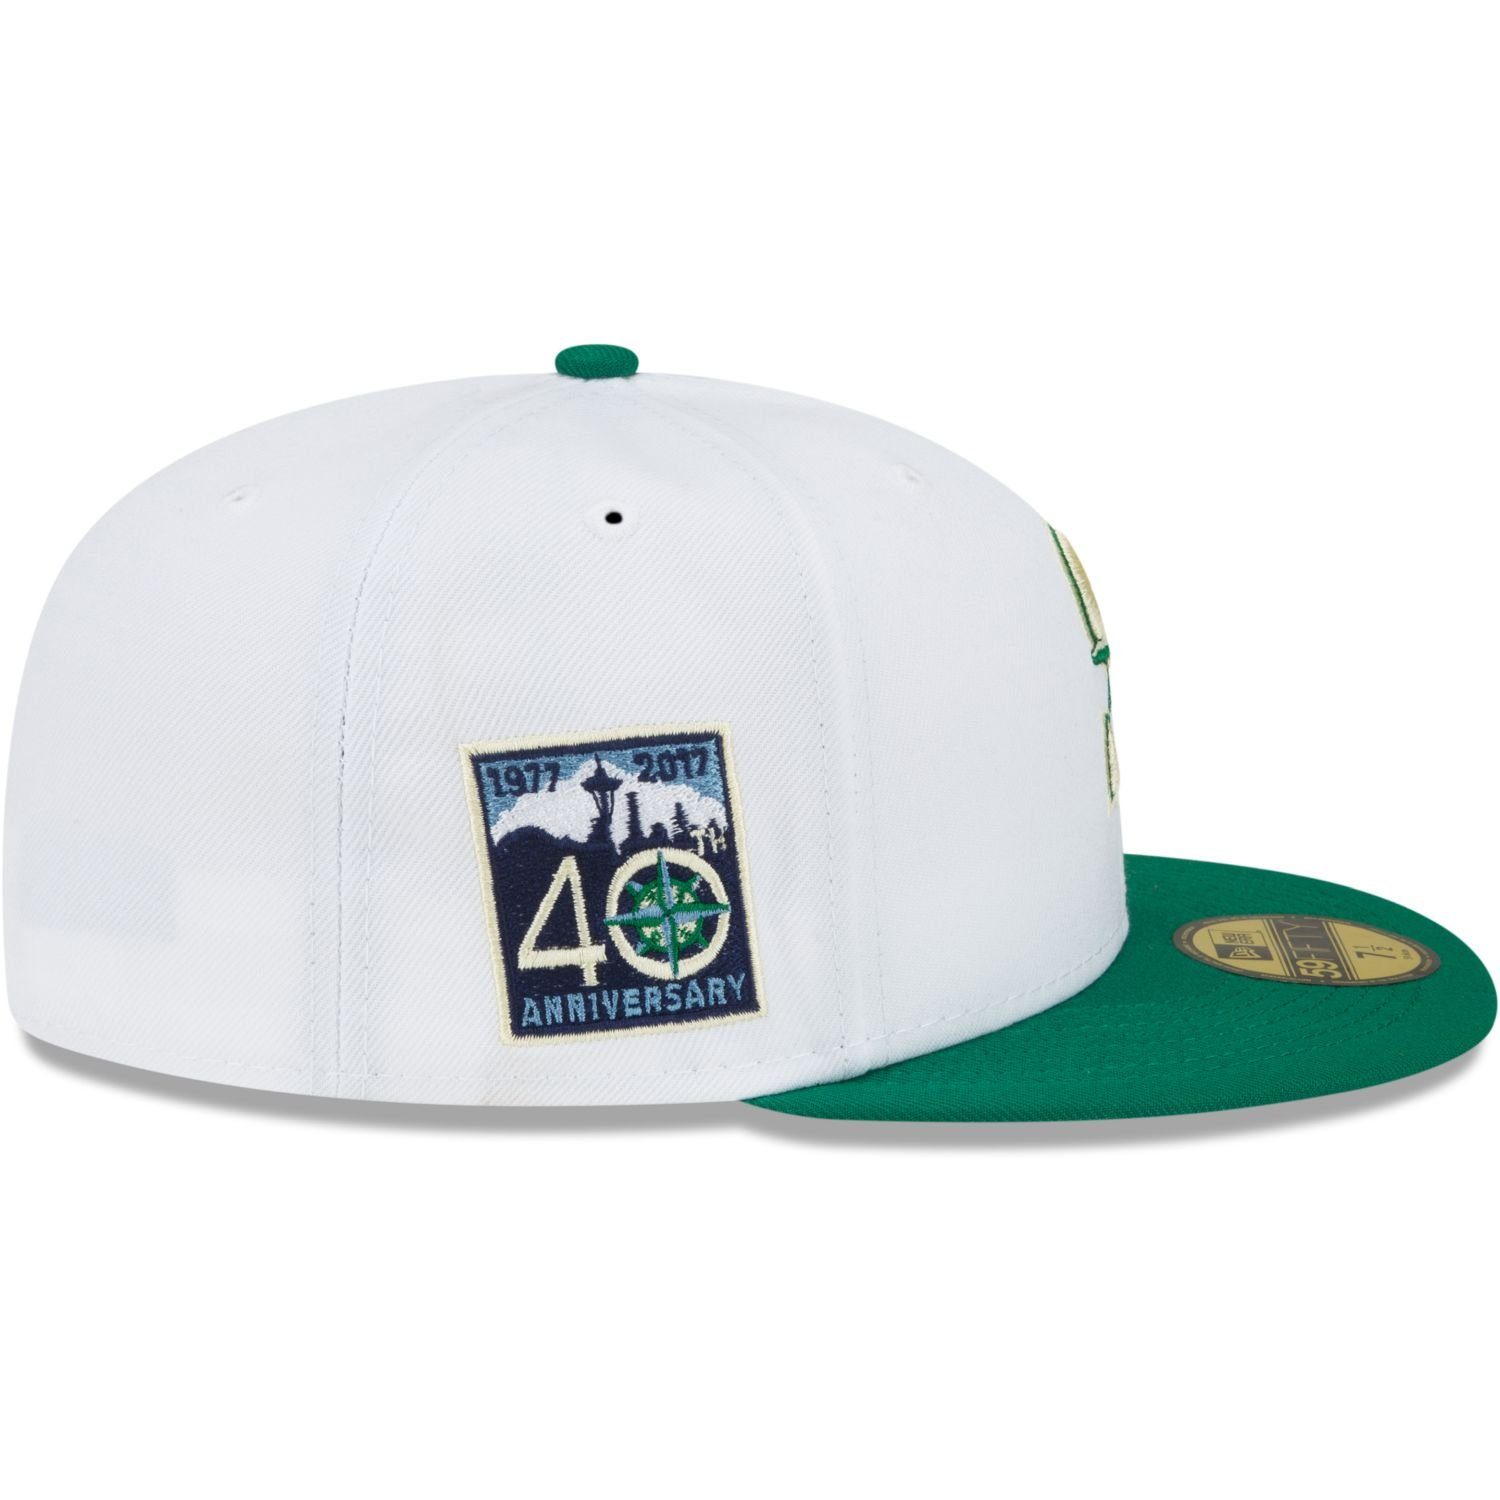 59Fifty ANNIVERSARY Era Fitted Cap Mariners Seattle New